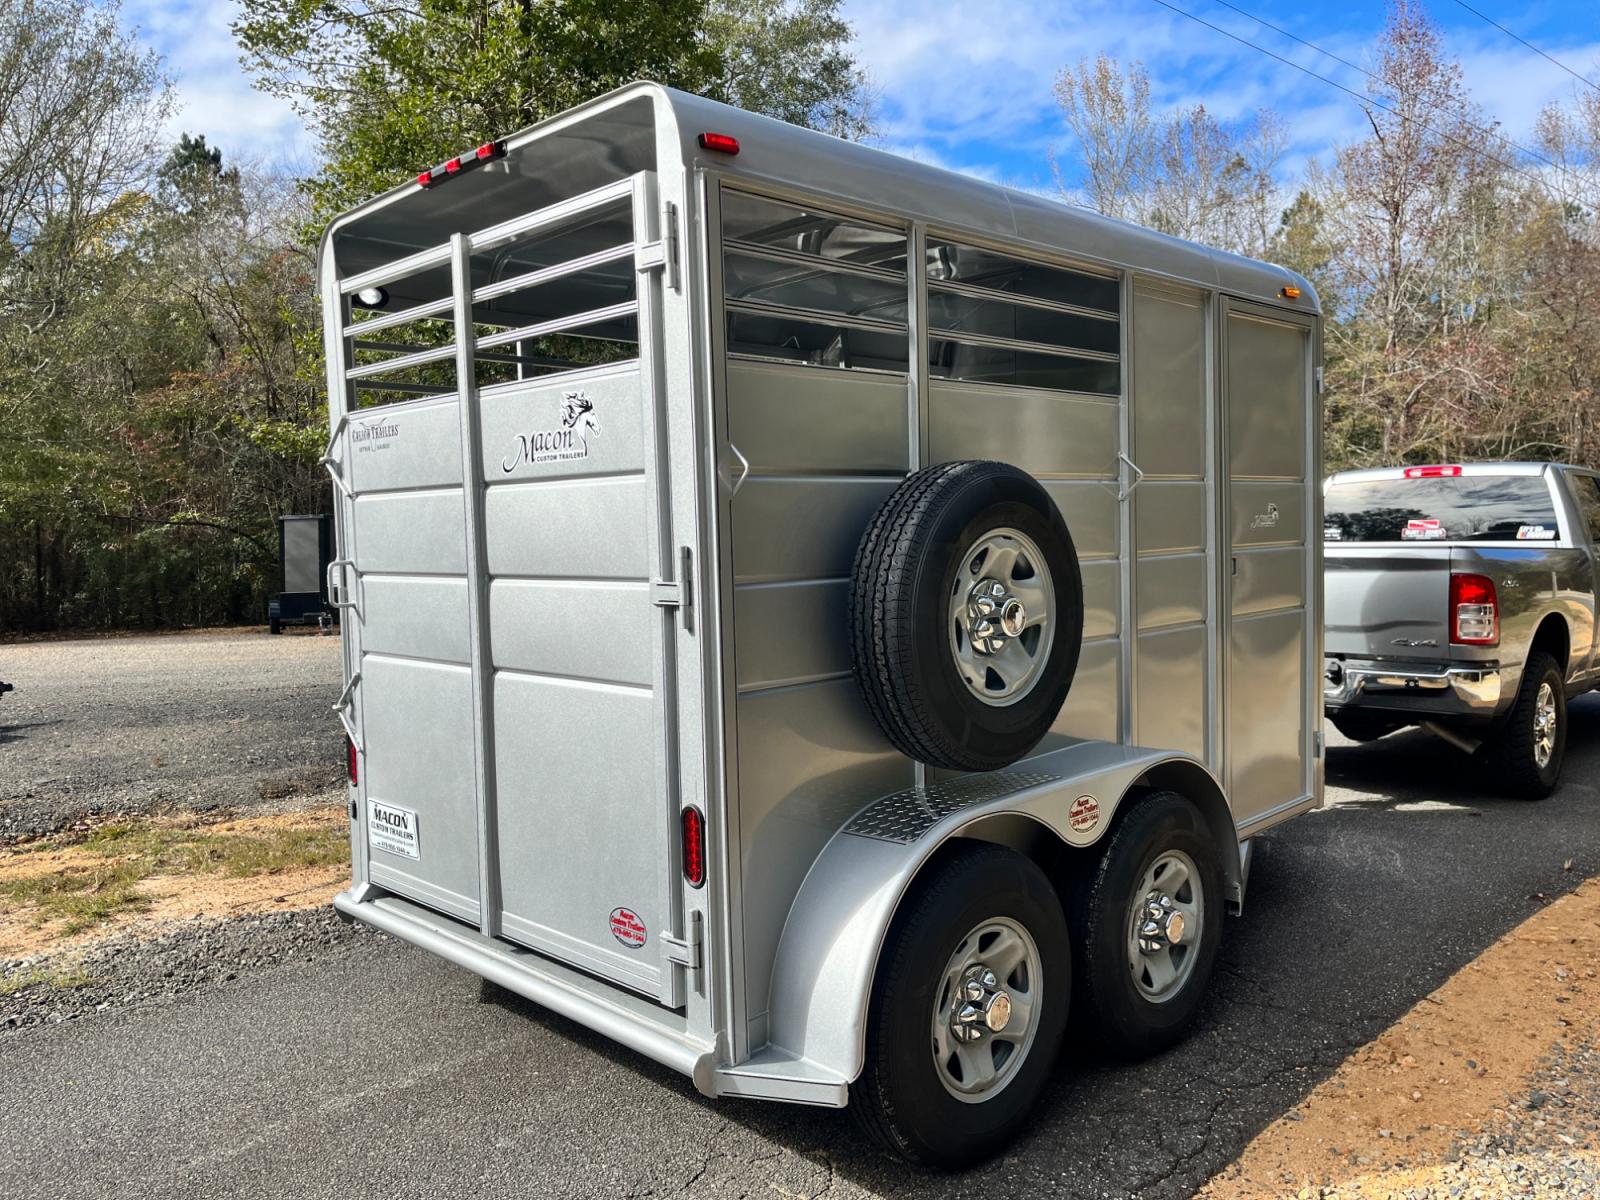 2023 Silver Metallic Calico 2 Horse Slant , located at 1330 Rainey Rd., Macon, 31220, (478) 960-1044, 32.845638, -83.778687 - Brand New 2023 Model 2 Horse Slant Calico Brand Trailer! 6ft Wide X 13ft Long Deluxe Model Tandem Axle Trailer! Easy Close Slant Divider Latch! 16" Radials! Beautiful Silver Metallic Paint is Awesome! Black Pin Striping Looks Fantastic! Fully Caulked Inside and Out to Prevent Rust! The Paint i - Photo #4